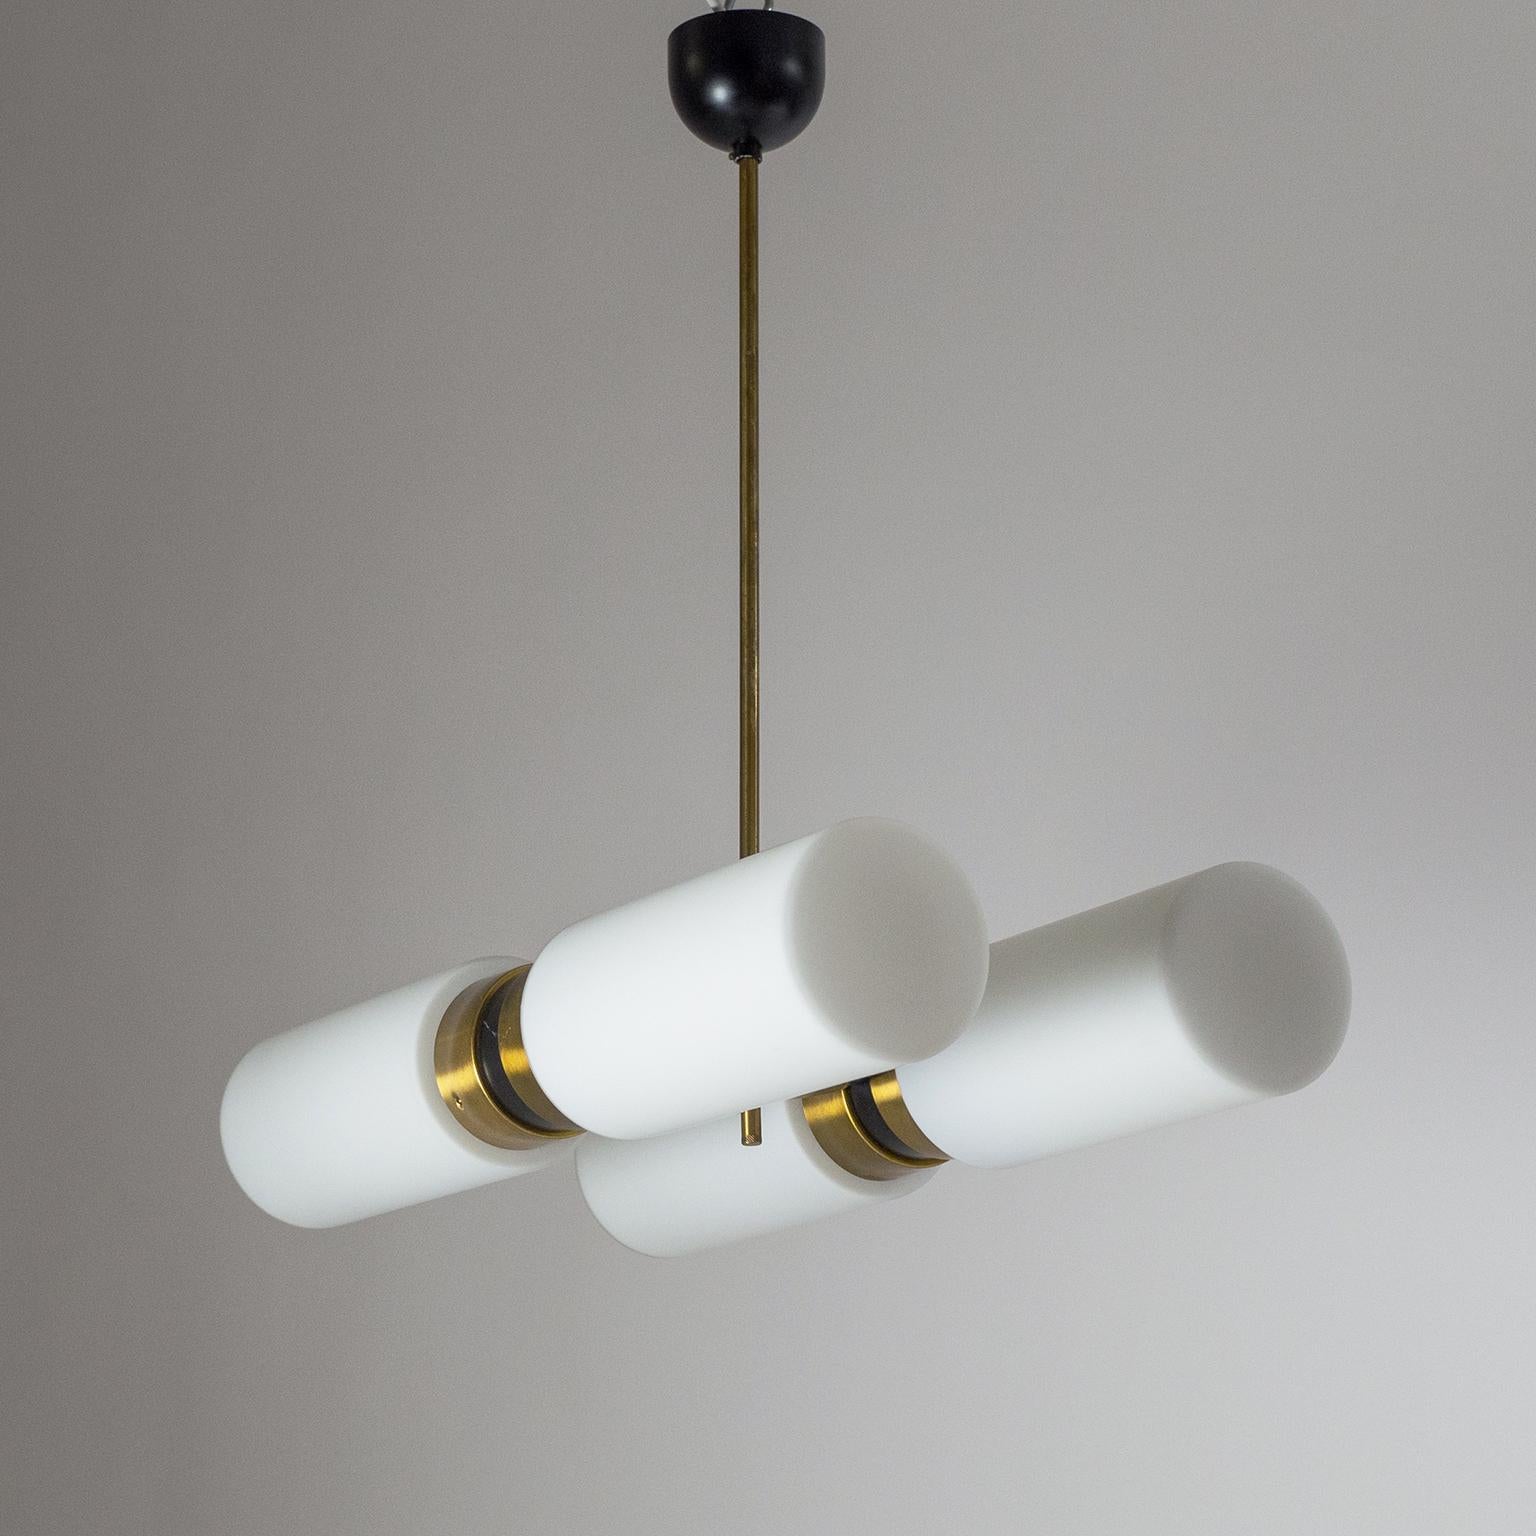 Excellent modernist satin glass and brass chandelier from the 1960s. Very sleek design paired with the timeless elegance of a brass, black and white color scheme. The glass diffusers are made of thick glass with a white inner casing and a satin